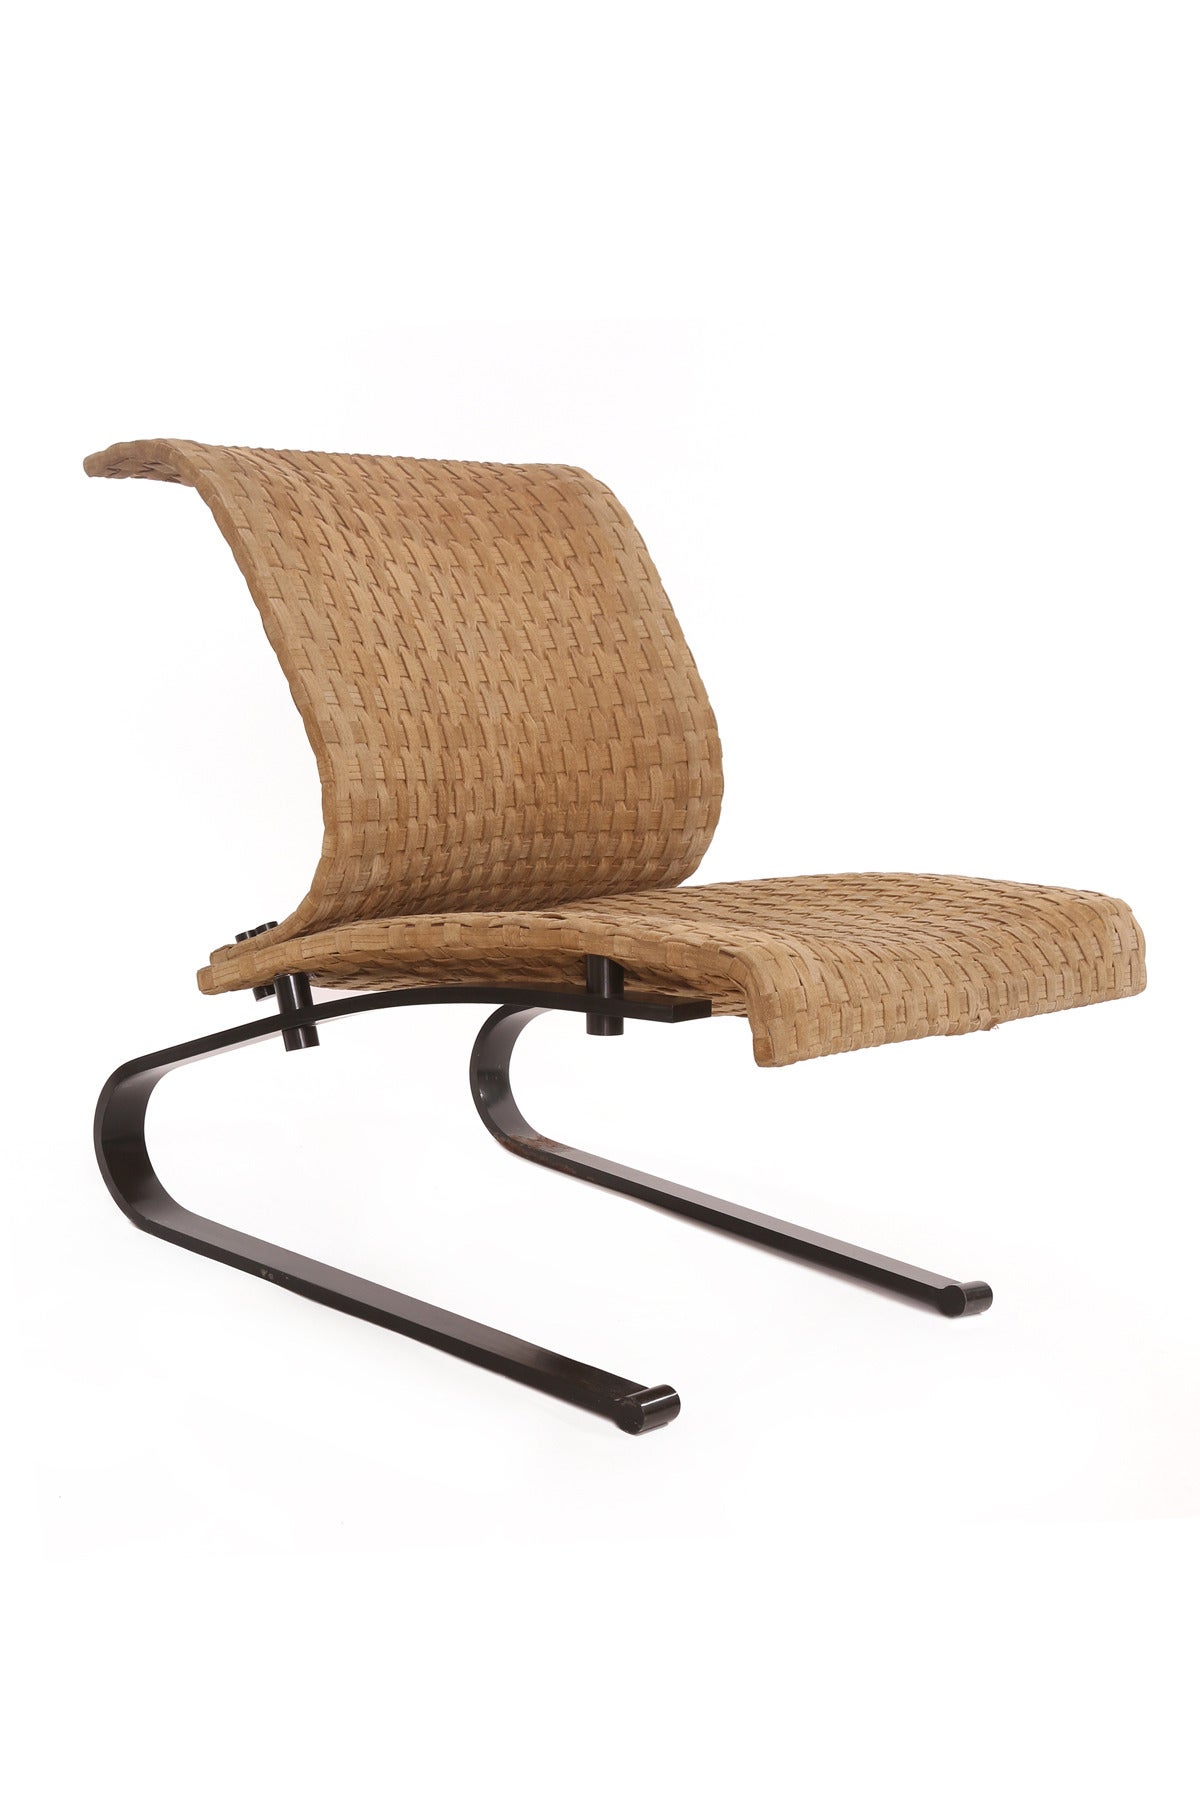 Italian Pair of Bronze and Woven Suede Lounge Chairs by Saporiti